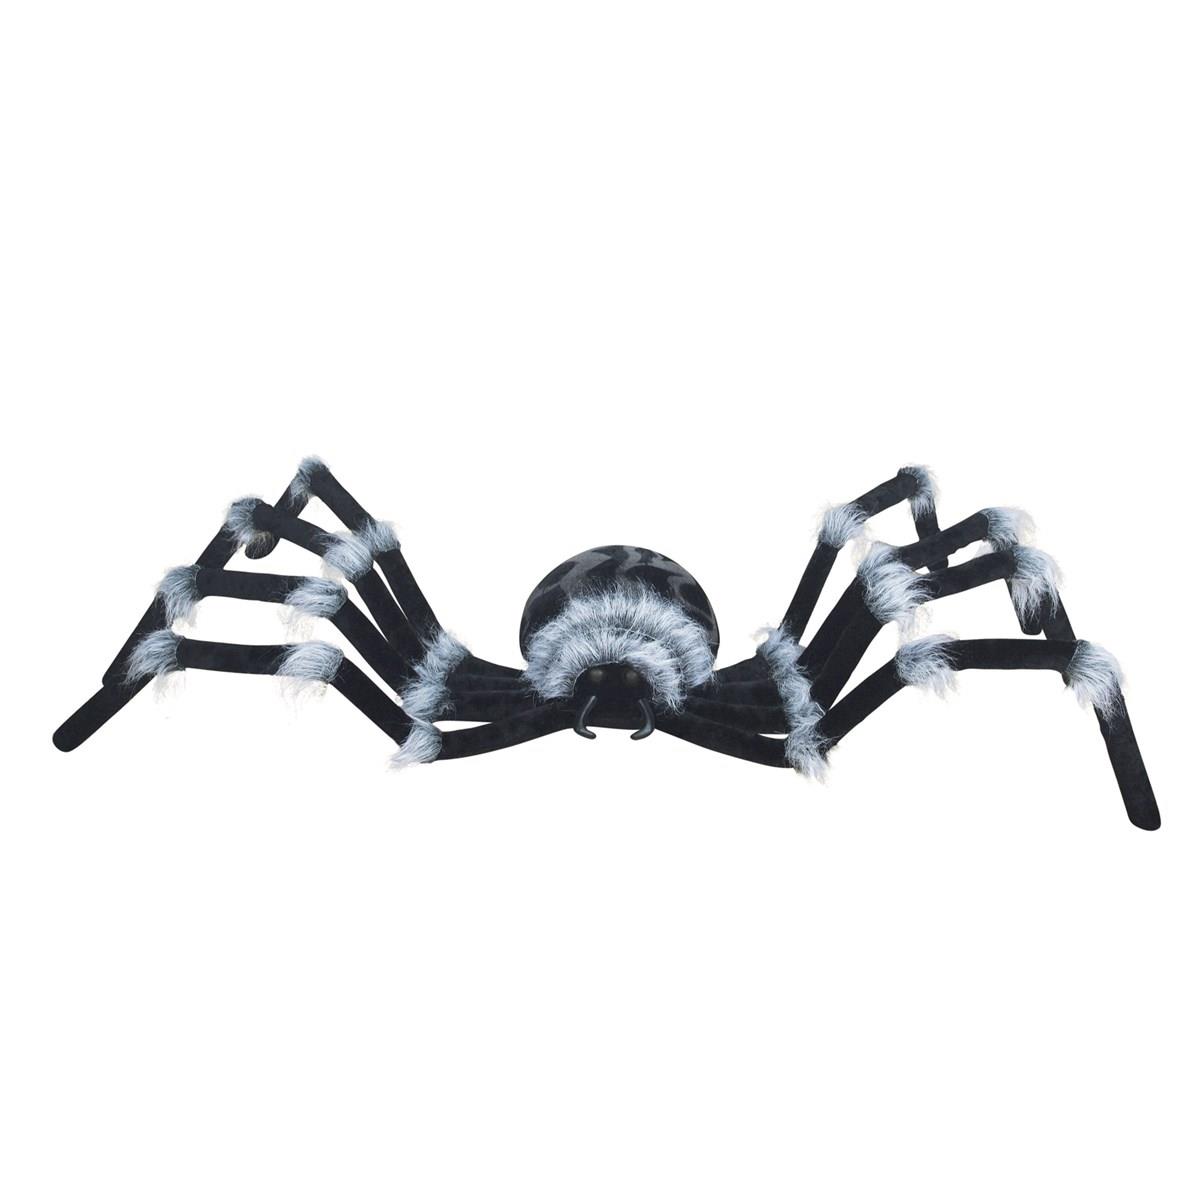 Picture of BuySeasons 248345 6 ft. Large Spider for Unisex - Black